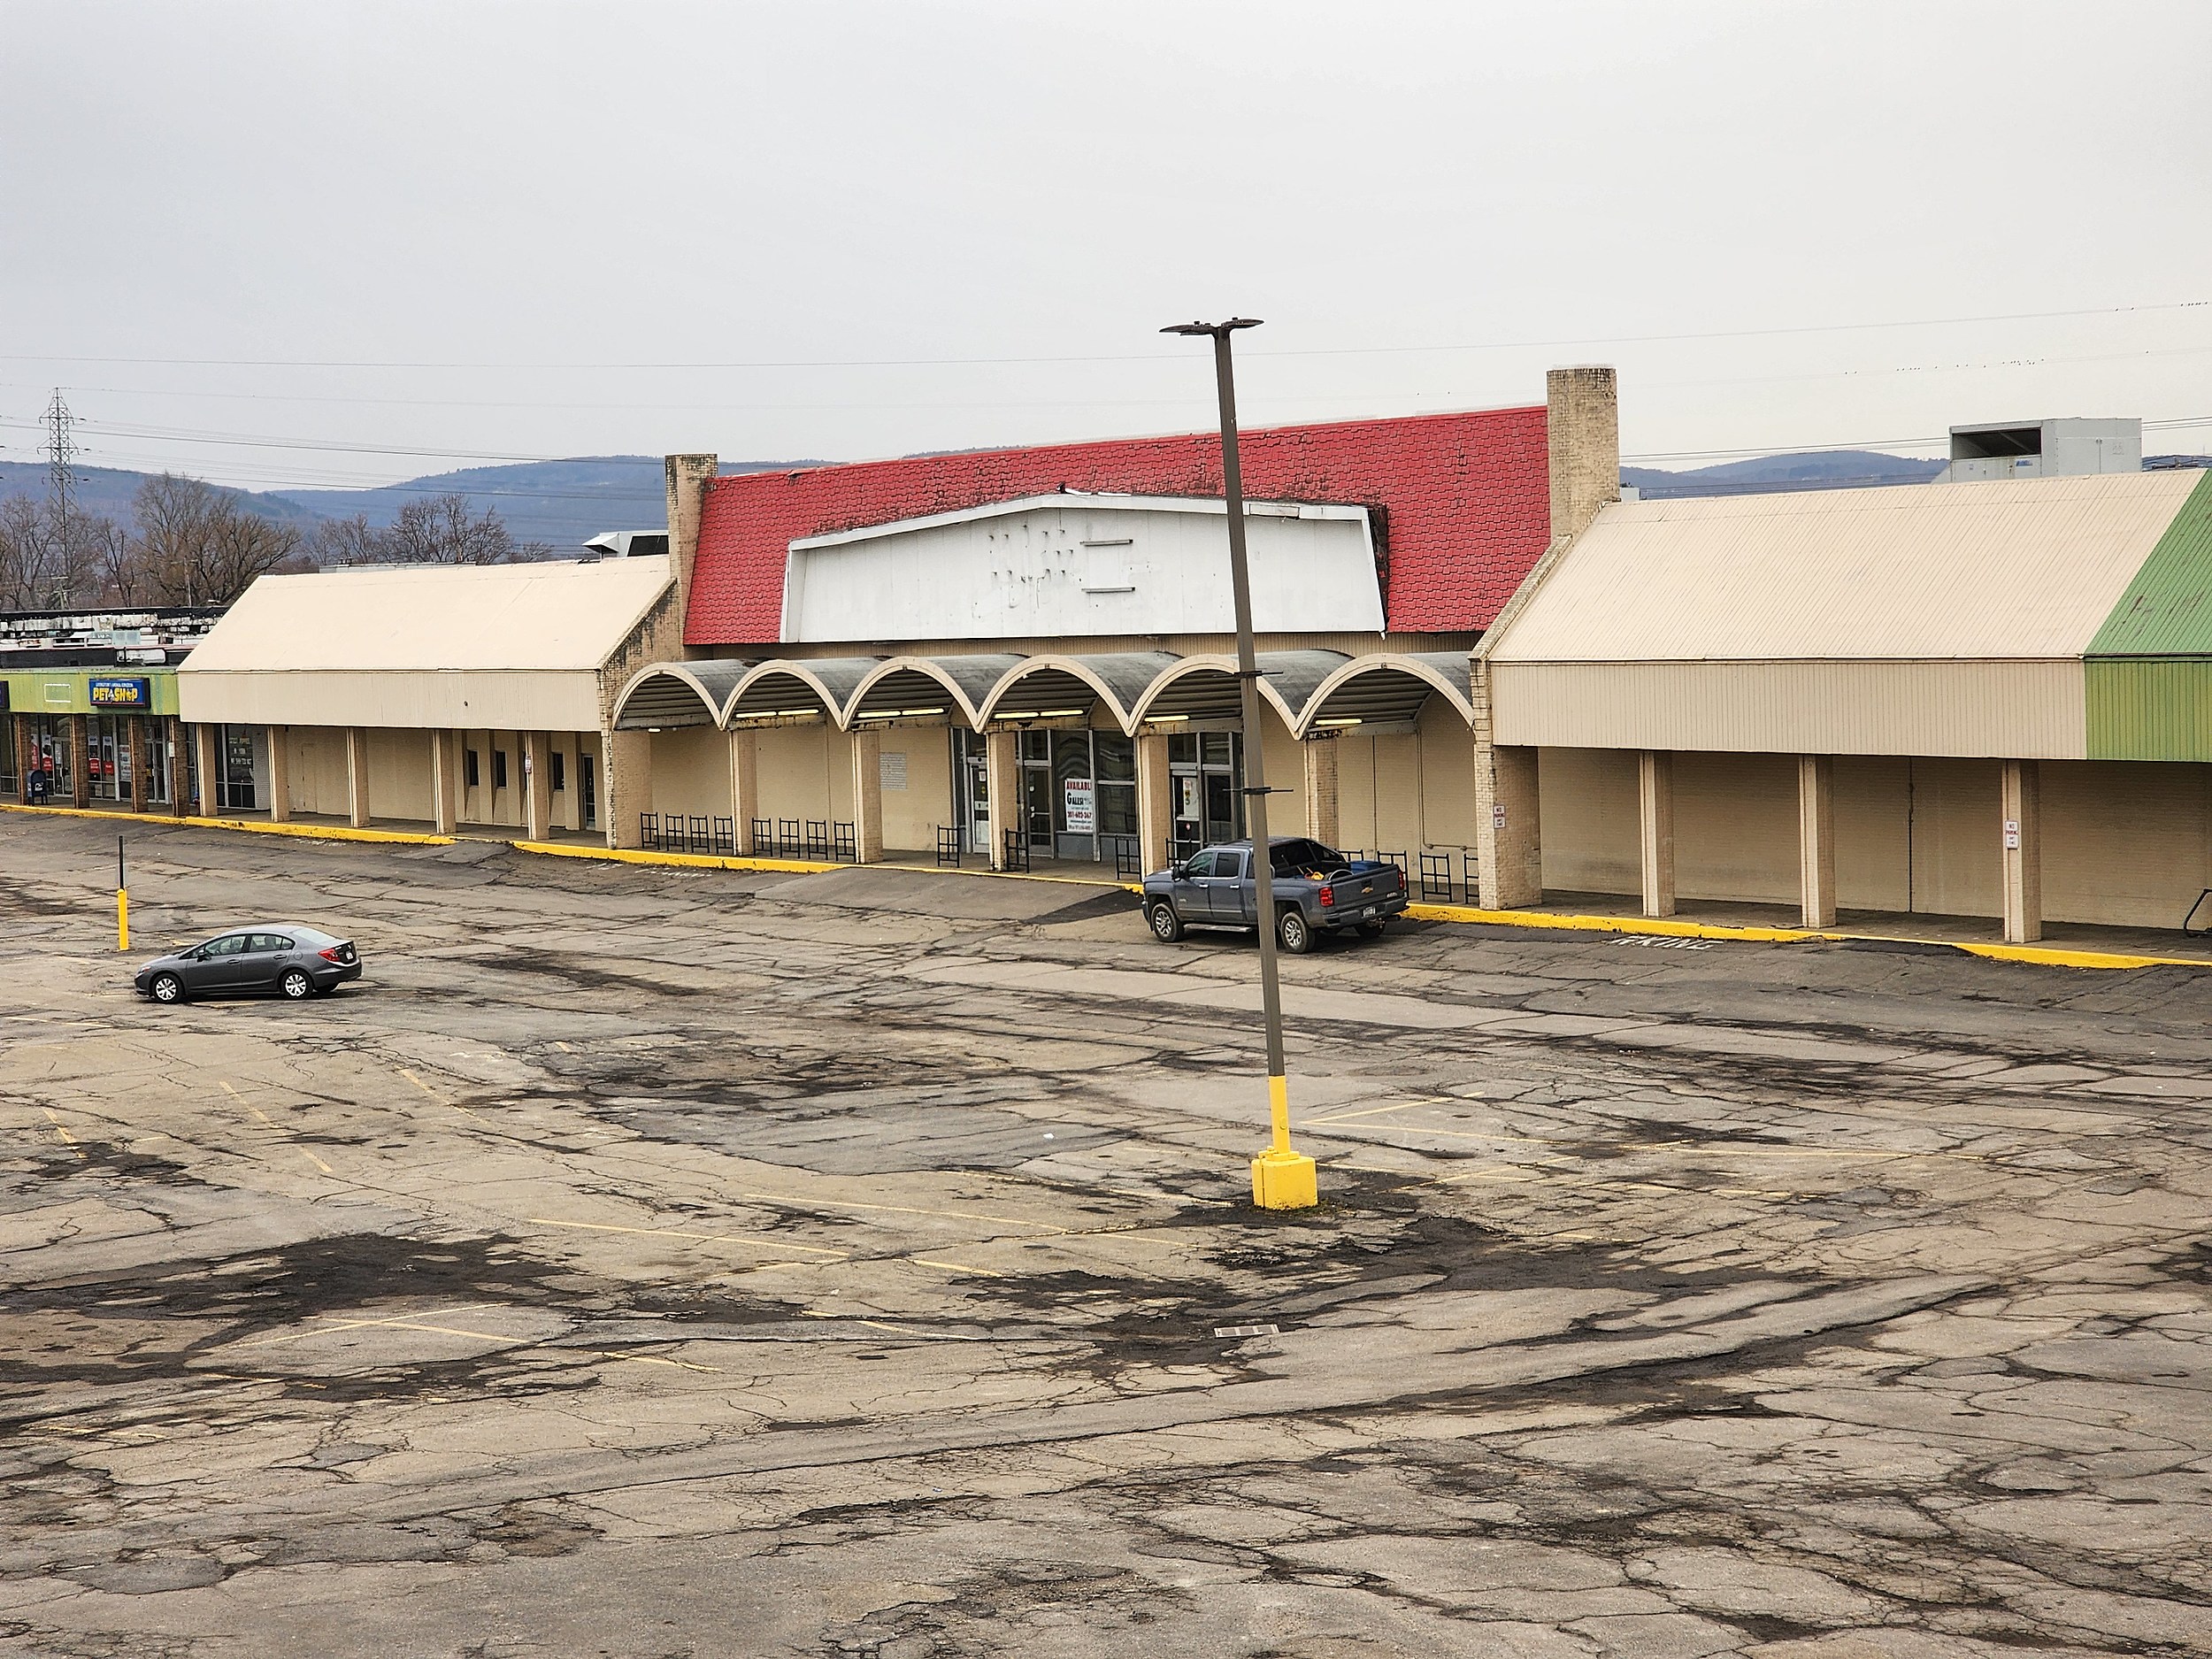 Owner, Shop Operators Concerned About Future of Binghamton Plaza image